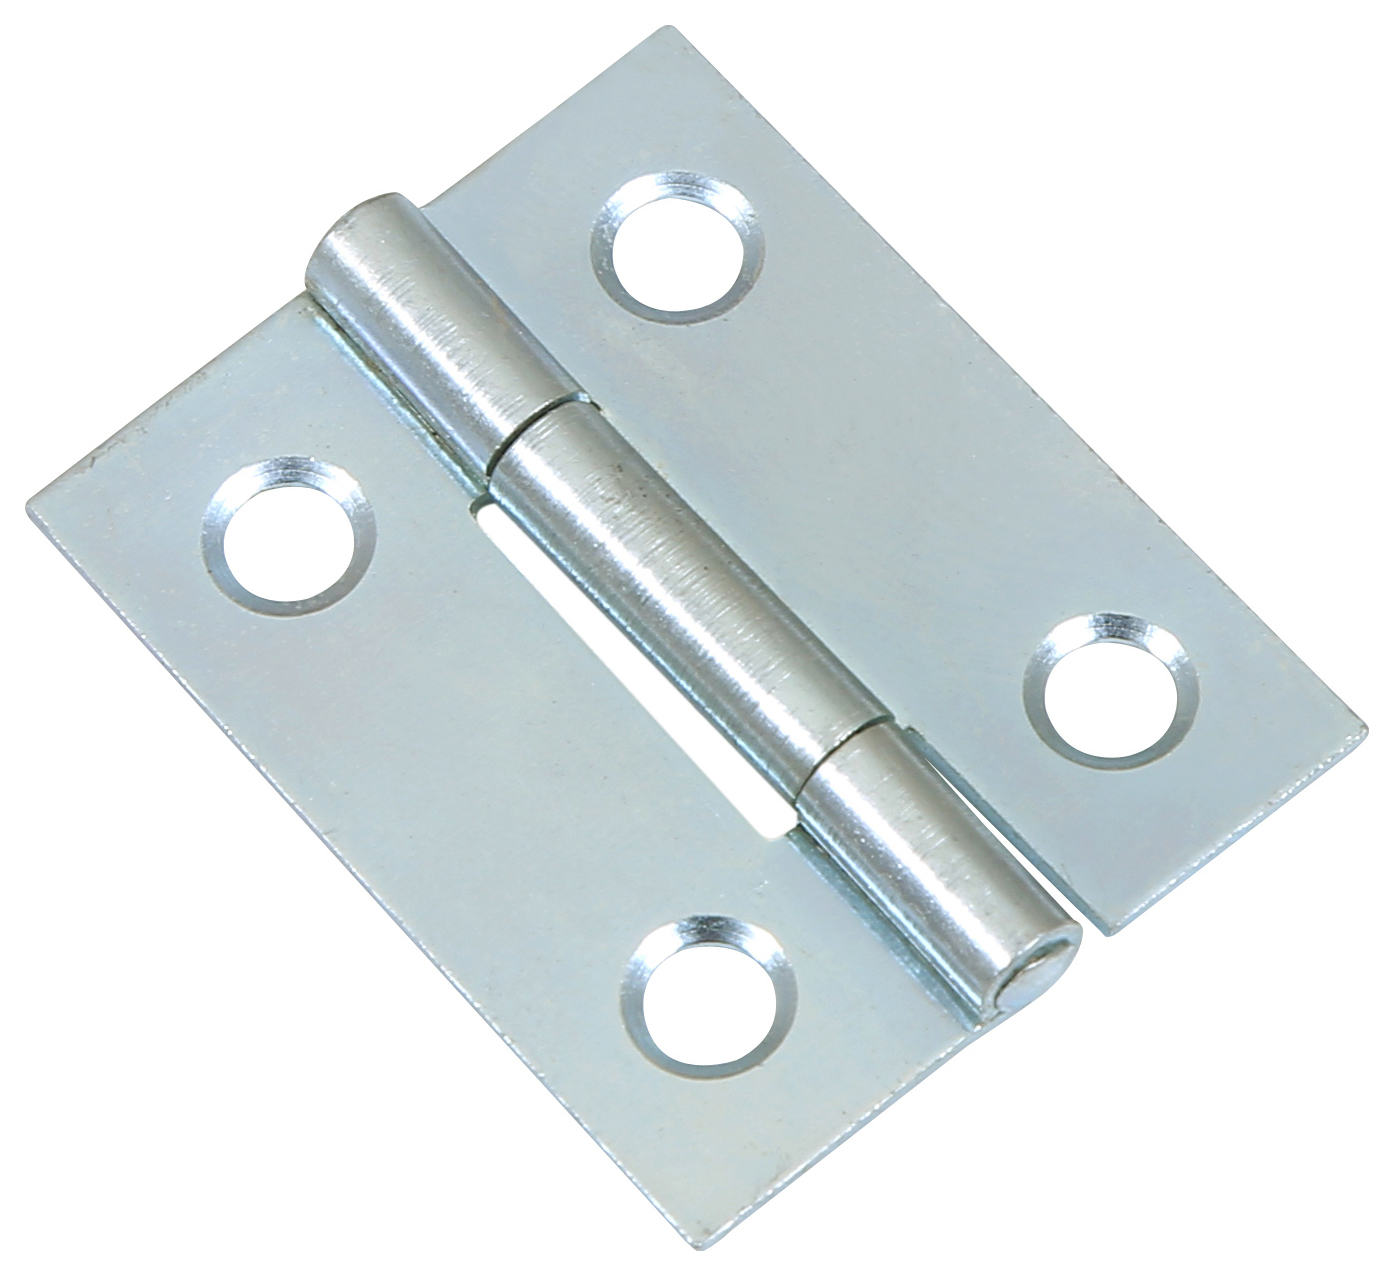 Image of Wickes Pack of 2 Butt Hinges, in Zinc plated, Steel, Size: 38mm